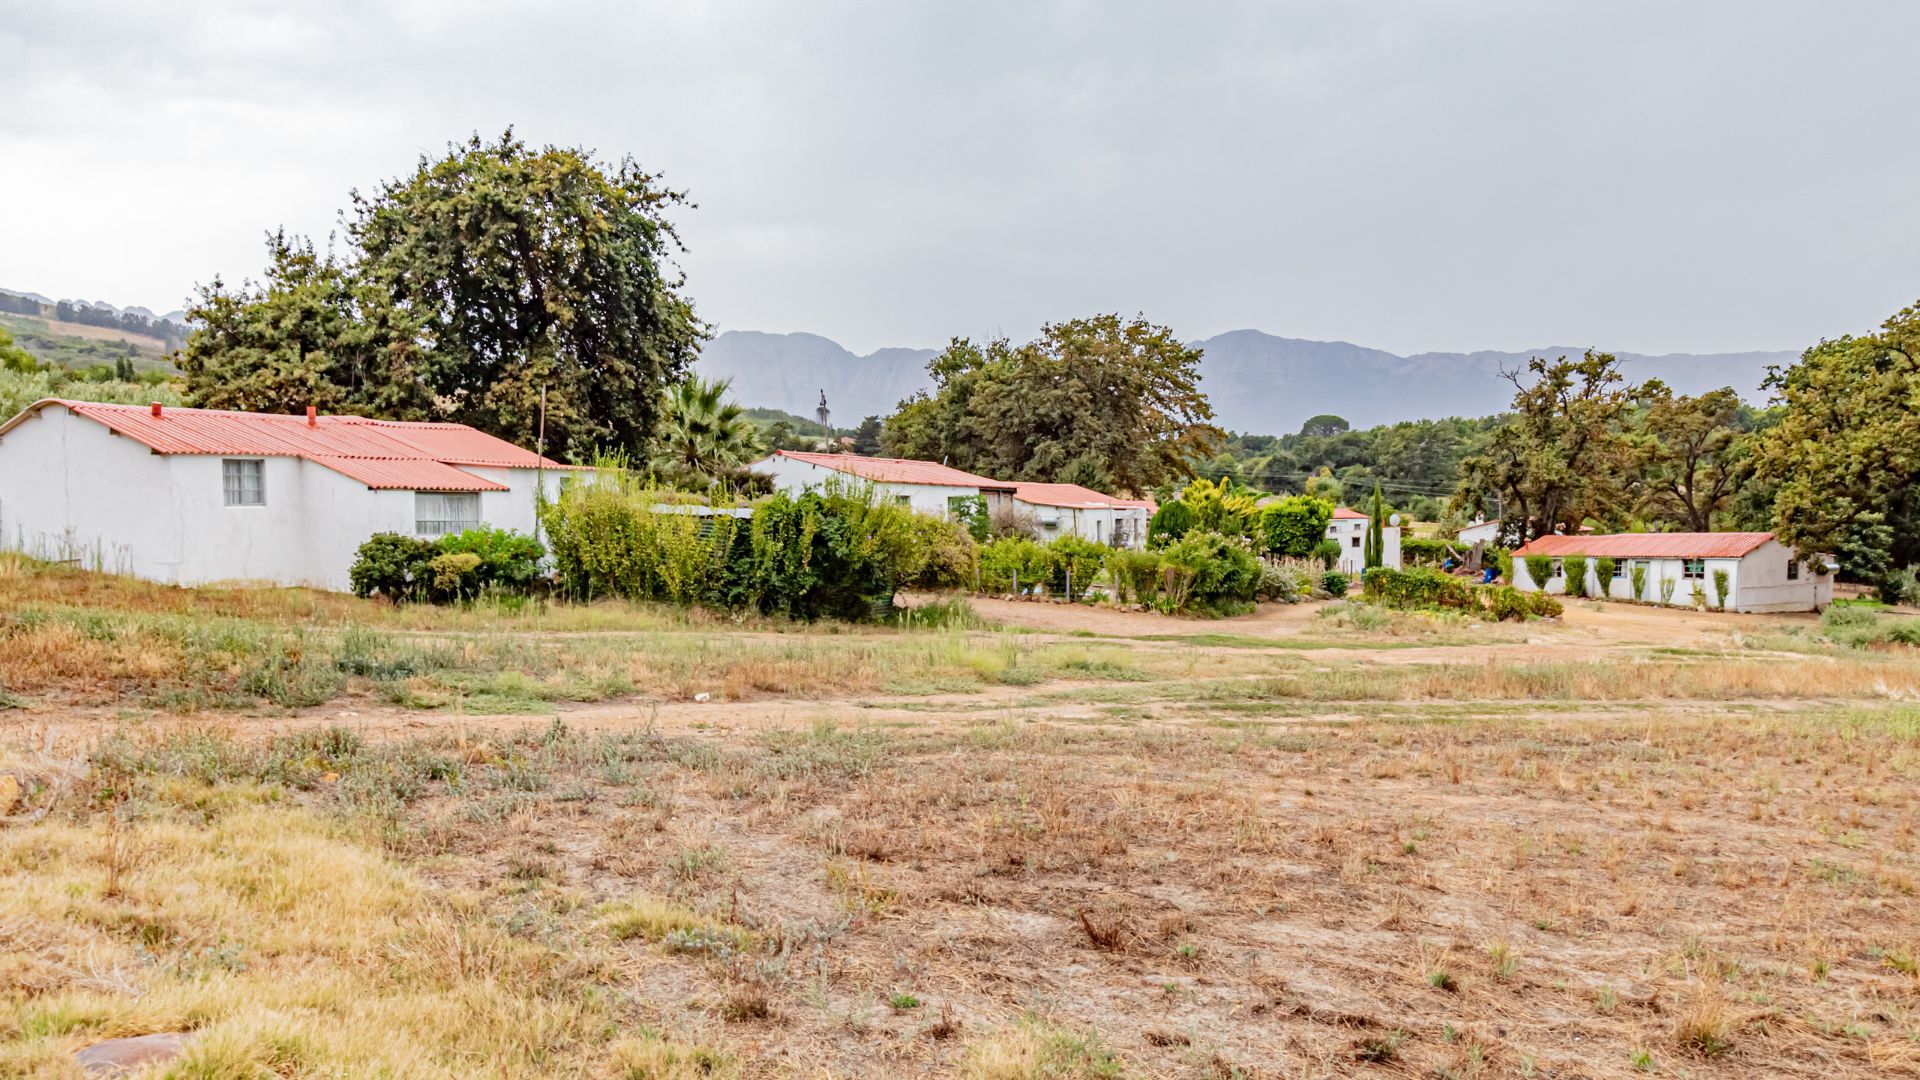 Land in Tulbagh - Image-082.jpg